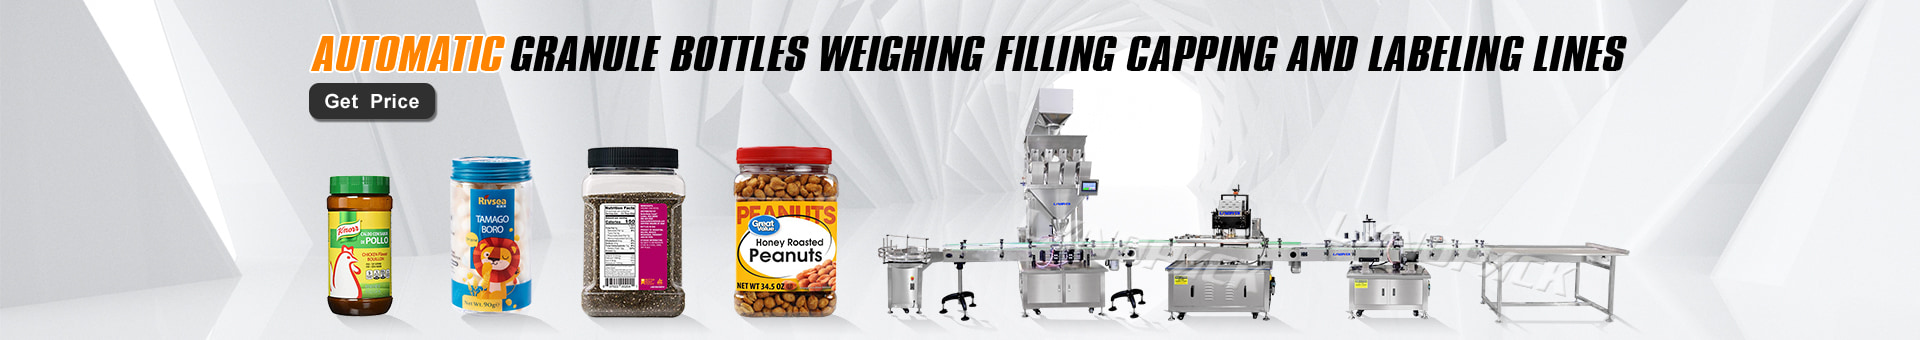 Granule Bottles Weighing Filling Capping and Labeling Line